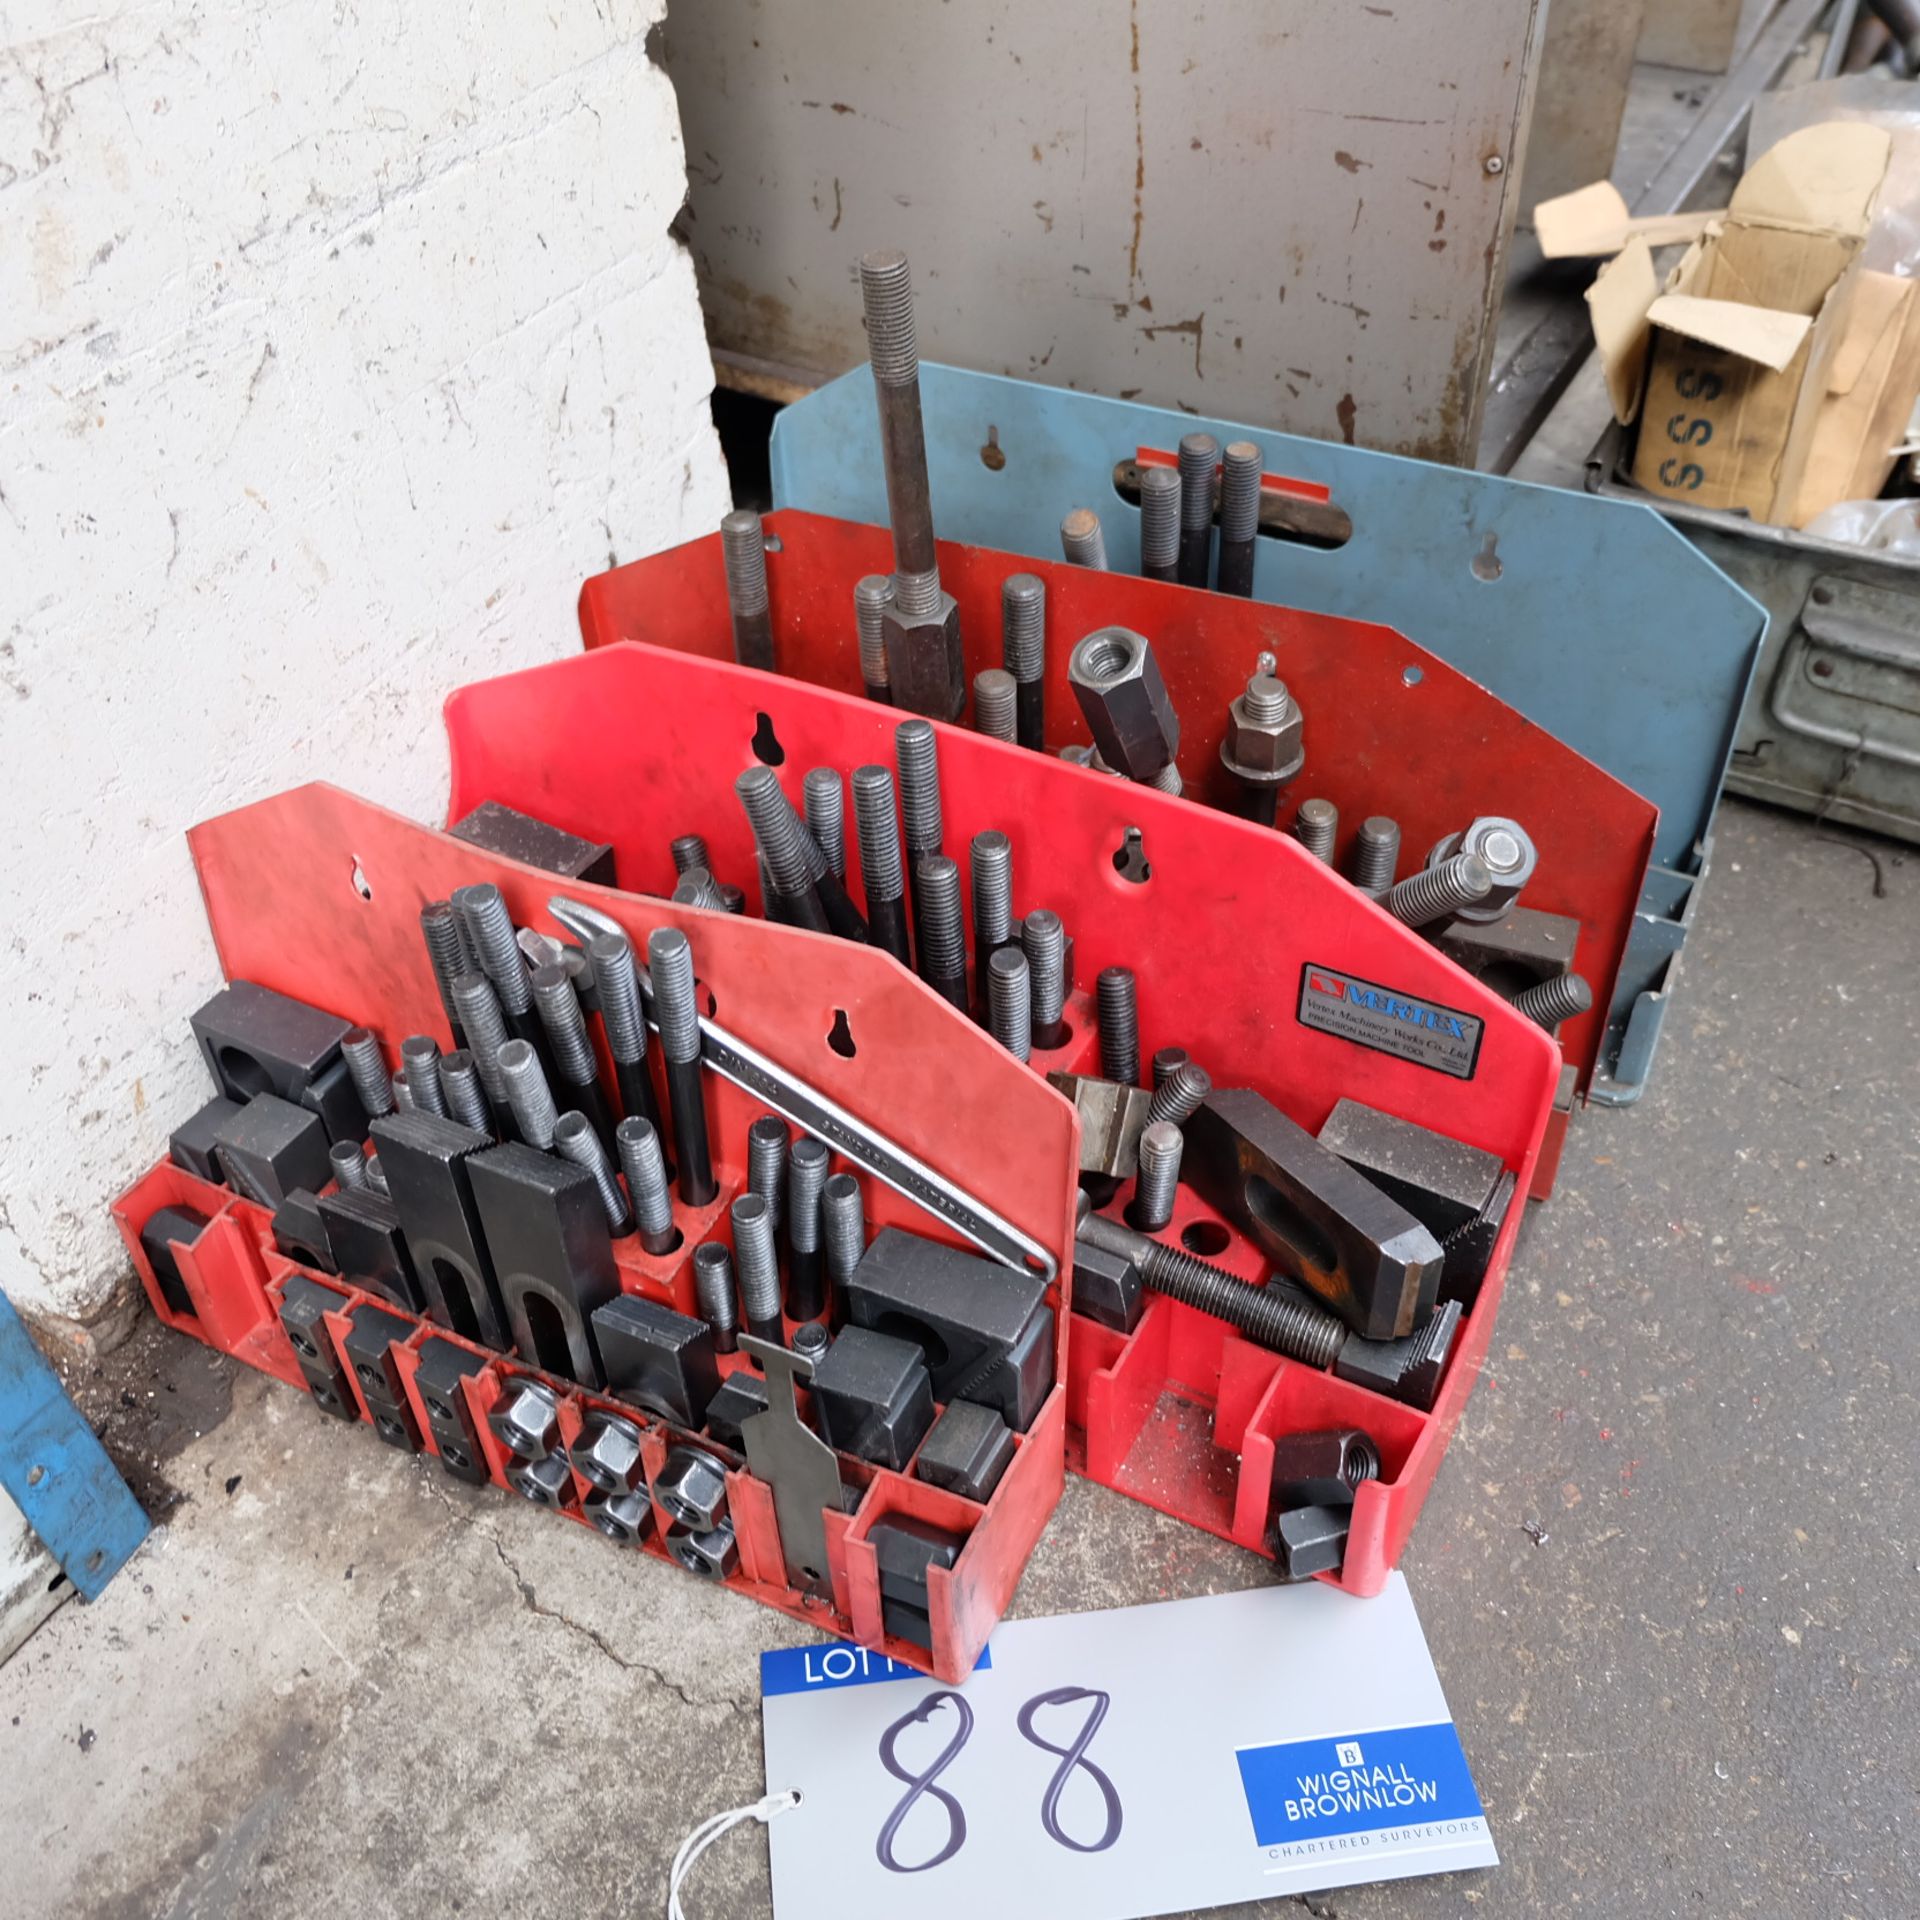 4 sets of Tool Clamps.